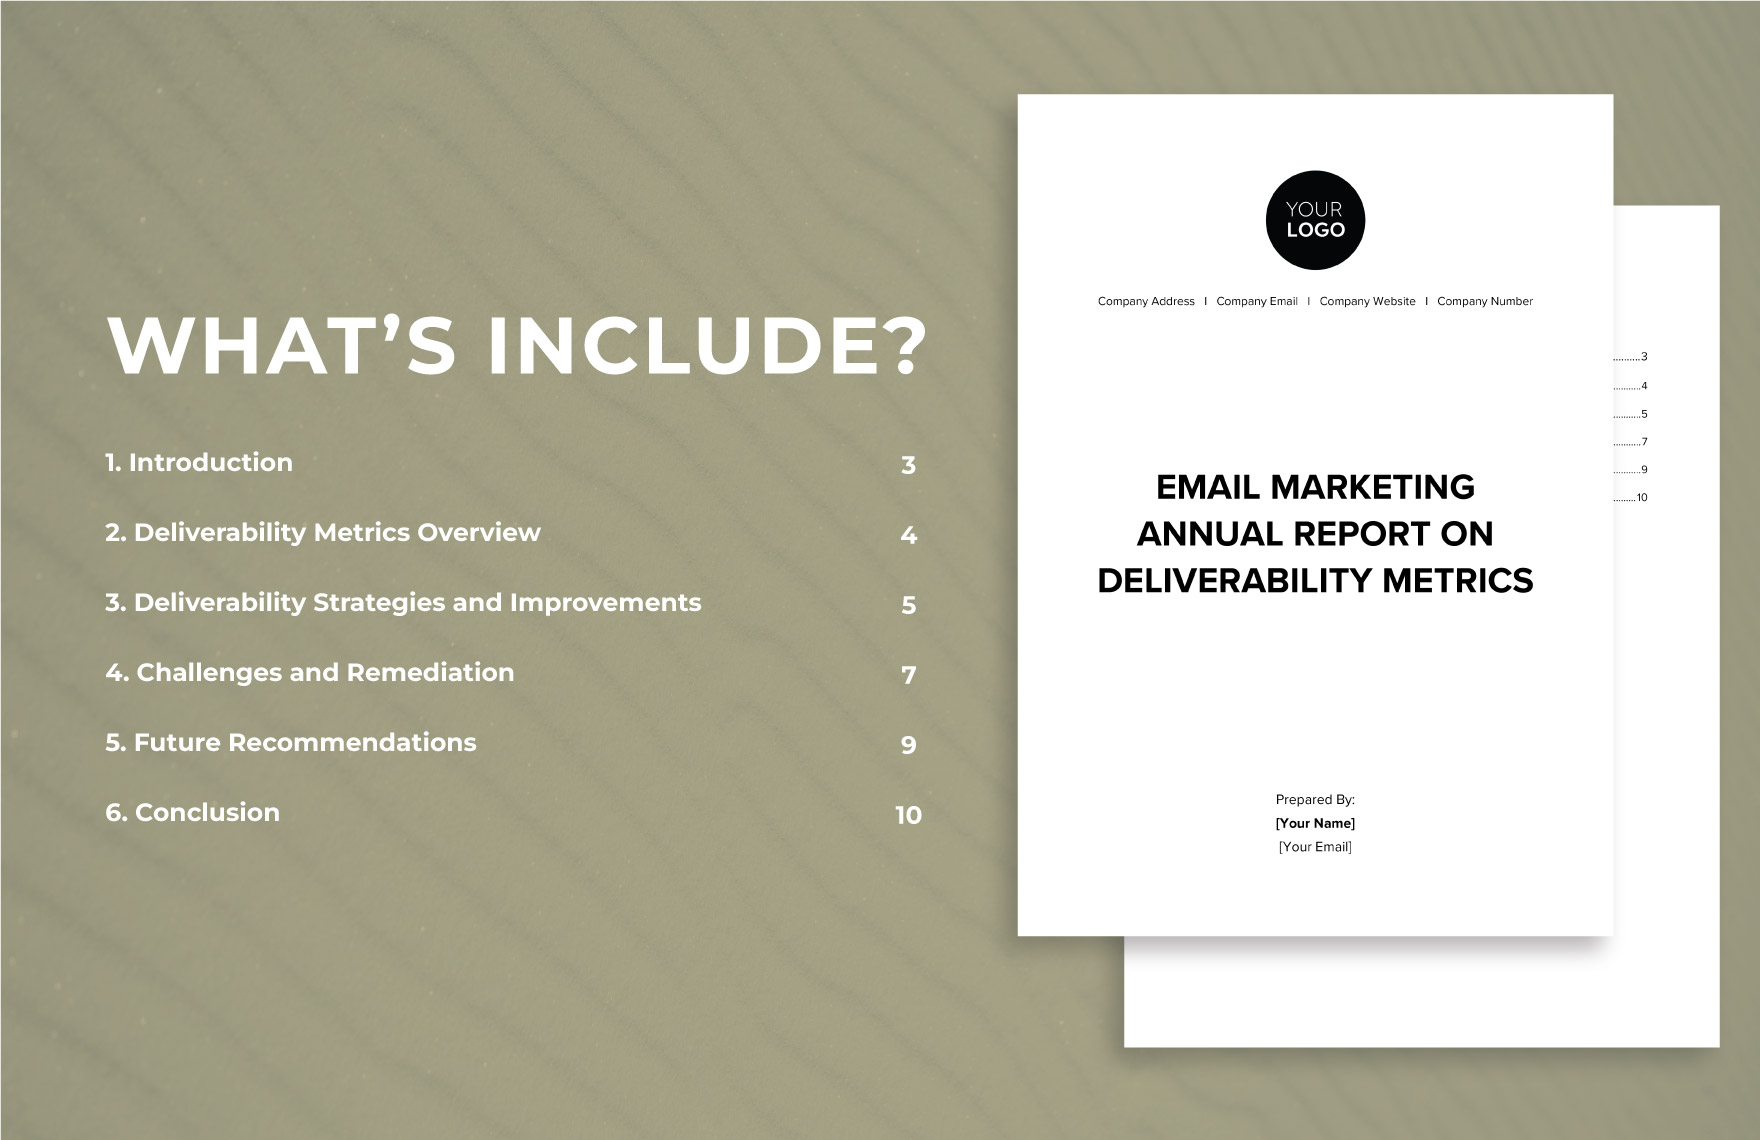 Email Marketing Annual Report on Deliverability Metrics Template